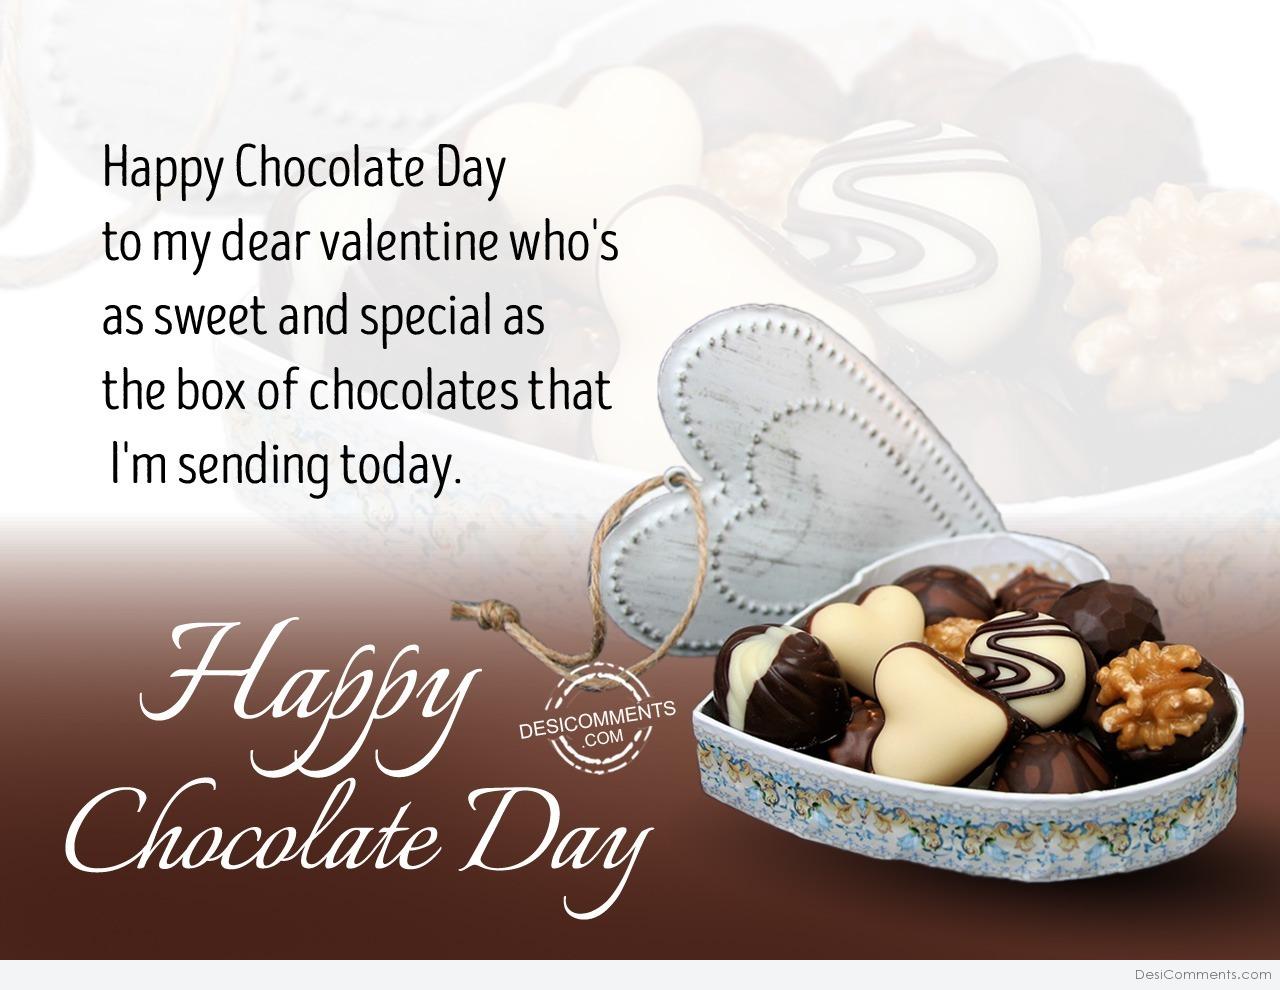 Happy Chocolate Day to my dear valentine - DesiComments.com